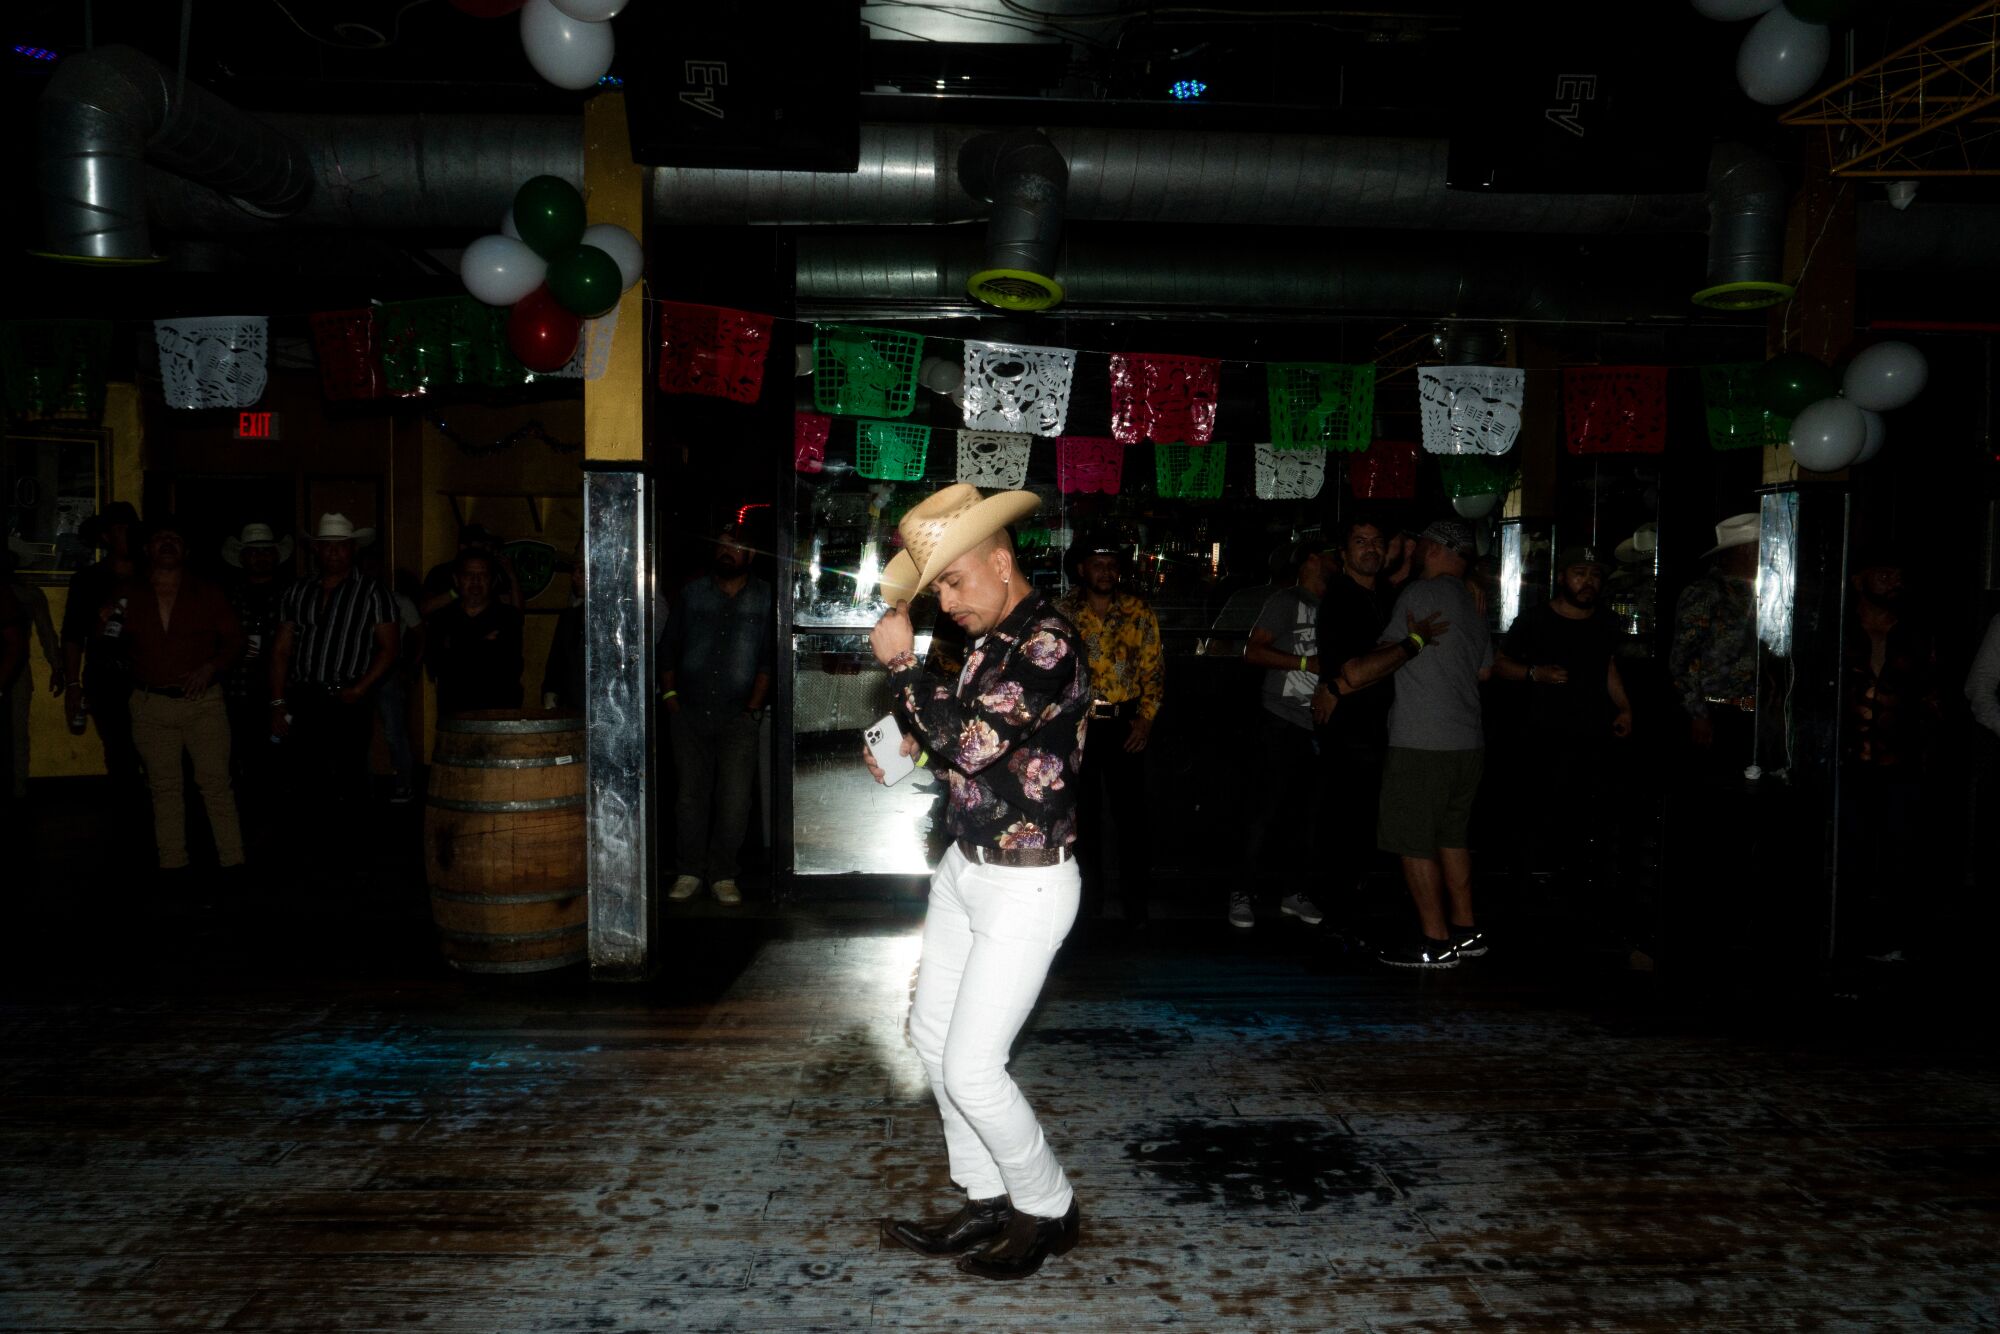 A man in white pants, a flowered shirt and a cowboy hat dances alone on a club dance floor.